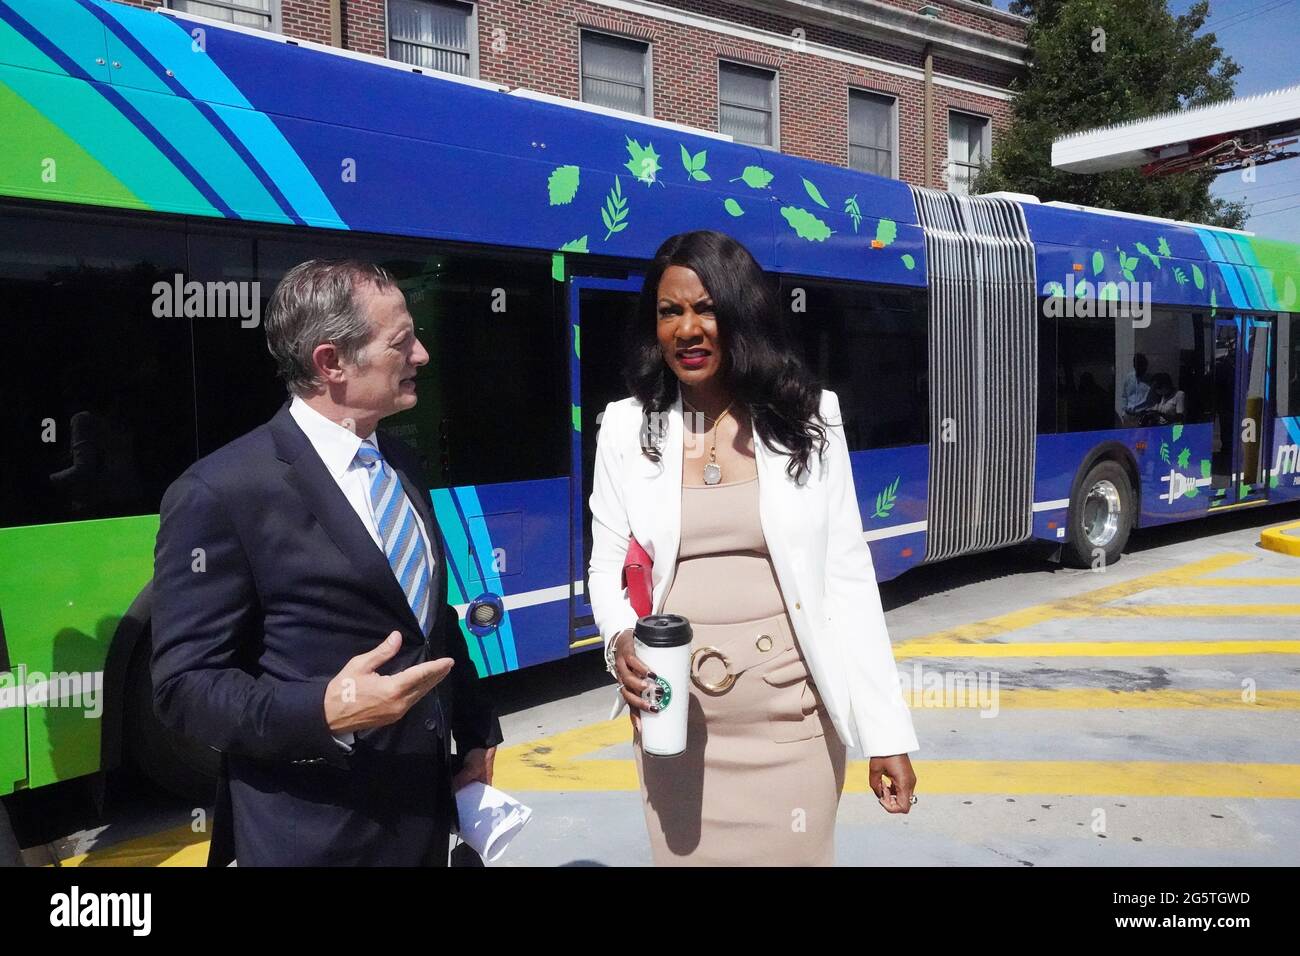 St. Louis, United States. 30th June, 2021. St. Louis Mayor Tishaura Jones gets a tour of a new Metro electric bus from Metro's CEO Taulby Roach in St. Louis on Tuesday, June 29, 2021.The new buses stretch 60 feet long and come with a price tag of $1.33 million each. The entire fleet will be composed of electric-powered or other nonpolluting buses by 2045. Photo by Bill Greenblatt/UPI Credit: UPI/Alamy Live News Stock Photo